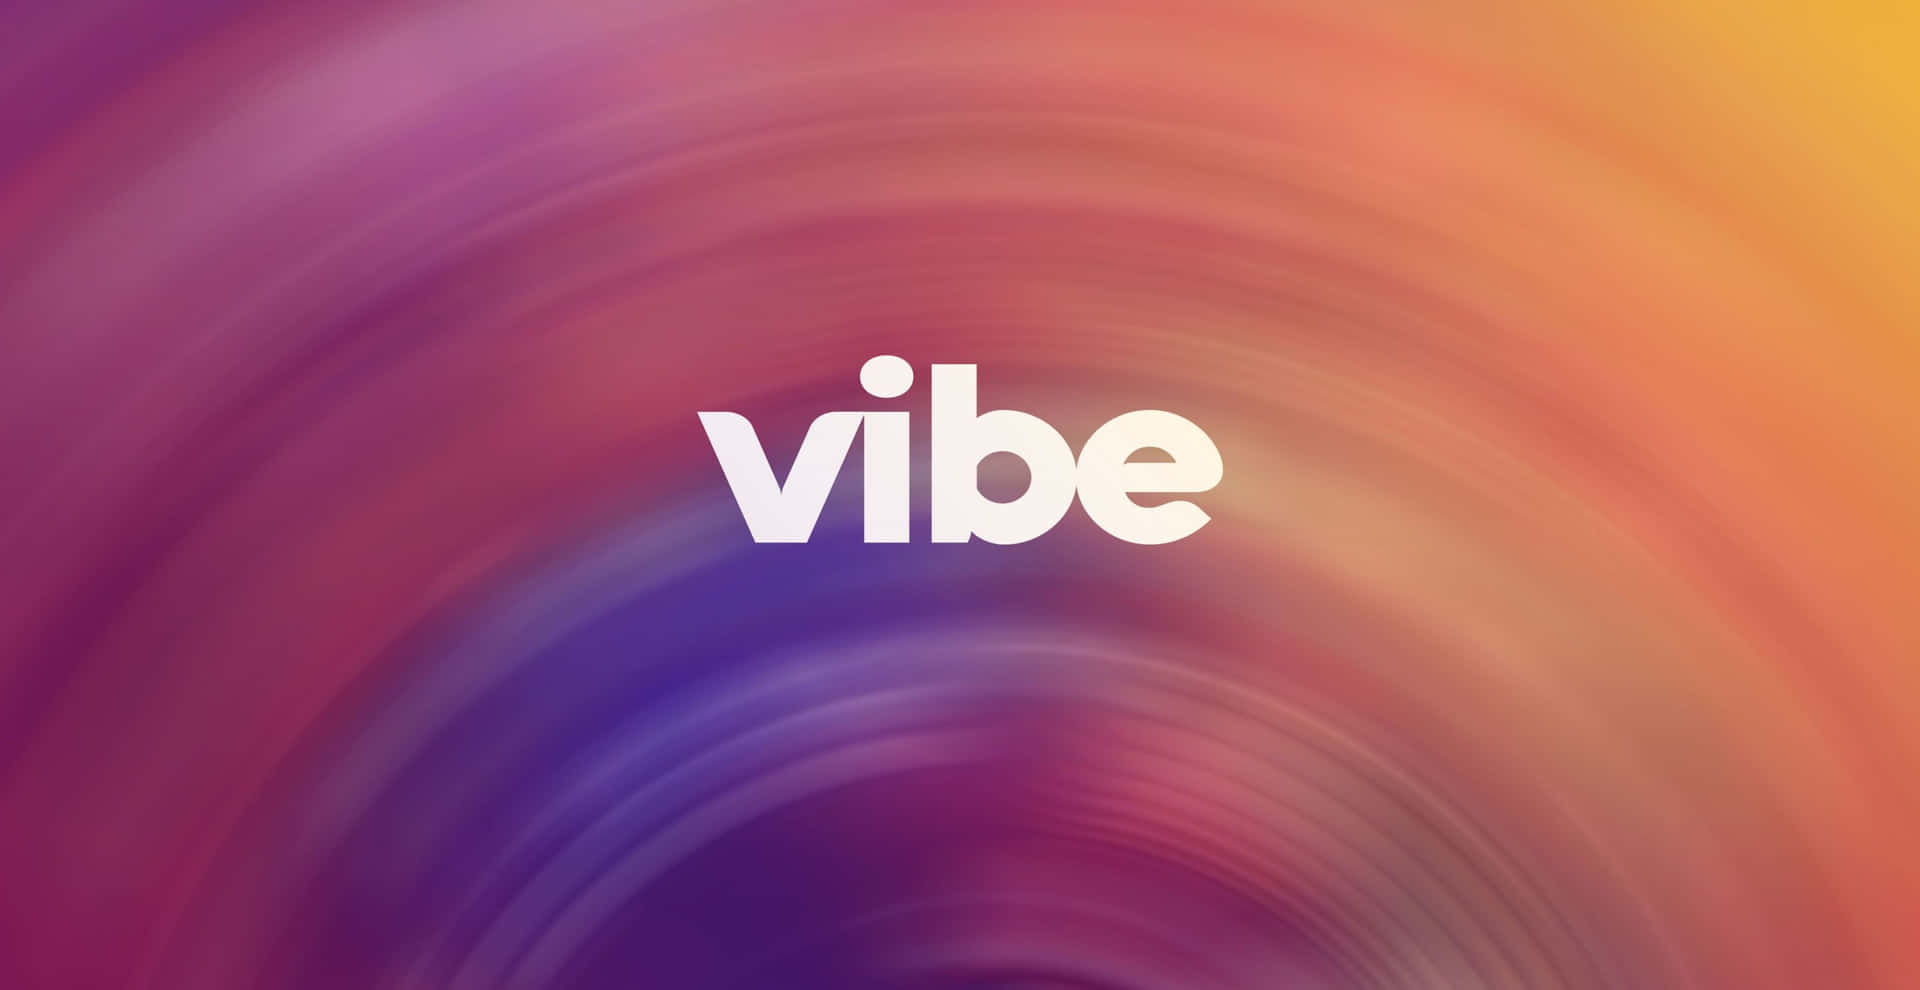 Wave goodbye to boring backgrounds with this awesome Vibe background!